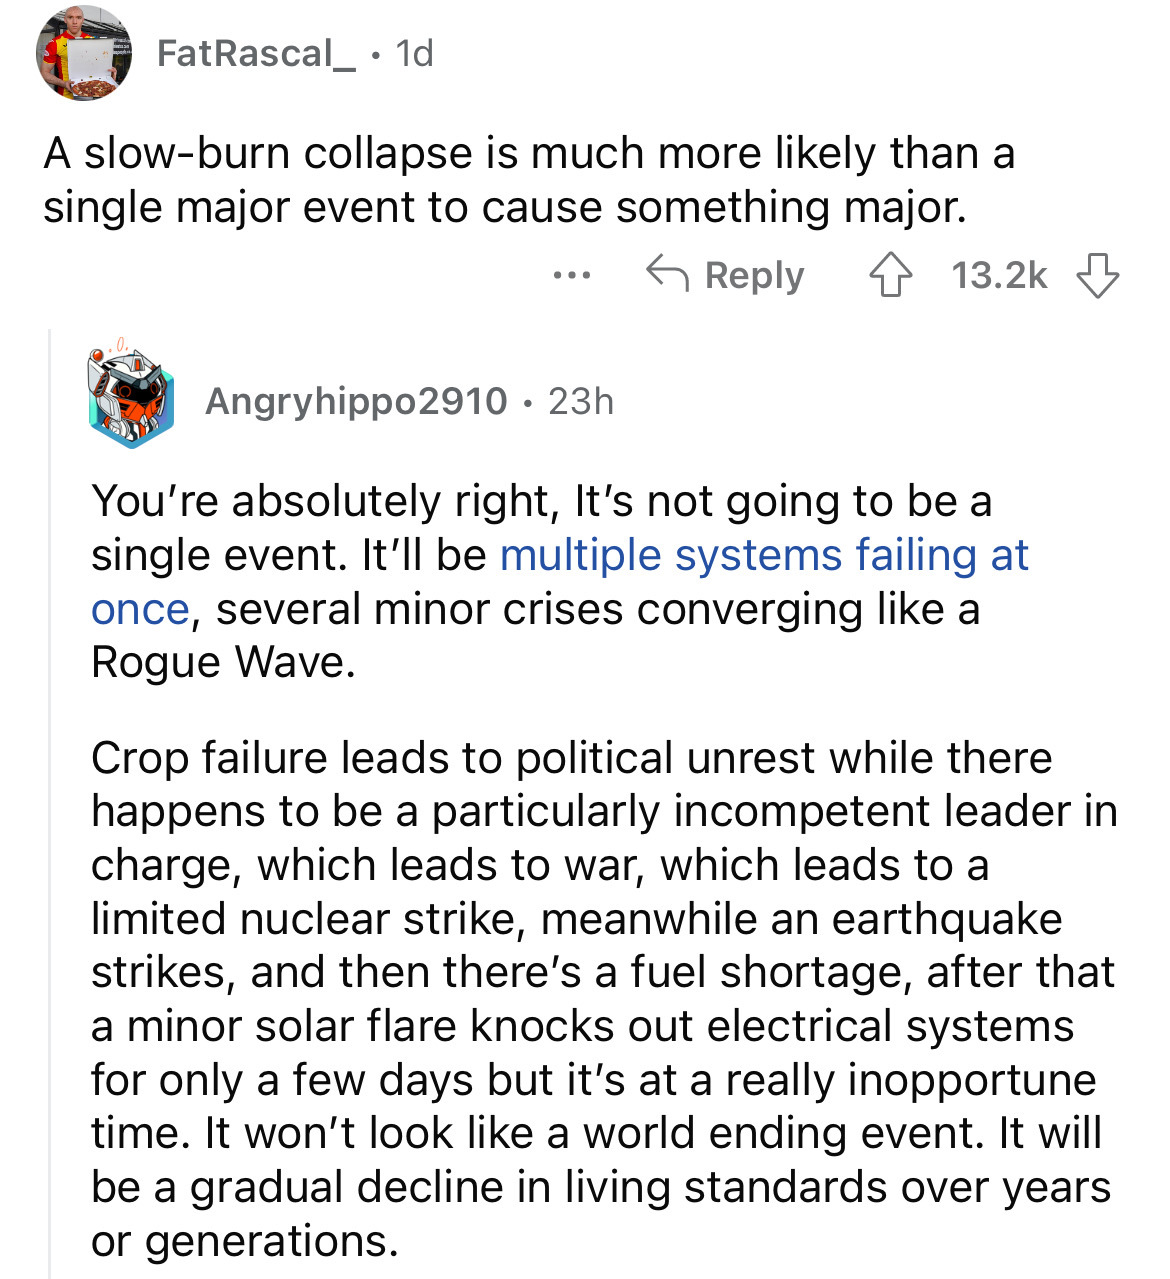 document - FatRascal 1d A slowburn collapse is much more ly than a single major event to cause something major. . . . Angryhippo2910 23h You're absolutely right, It's not going to be a single event. It'll be multiple systems failing at once, several minor